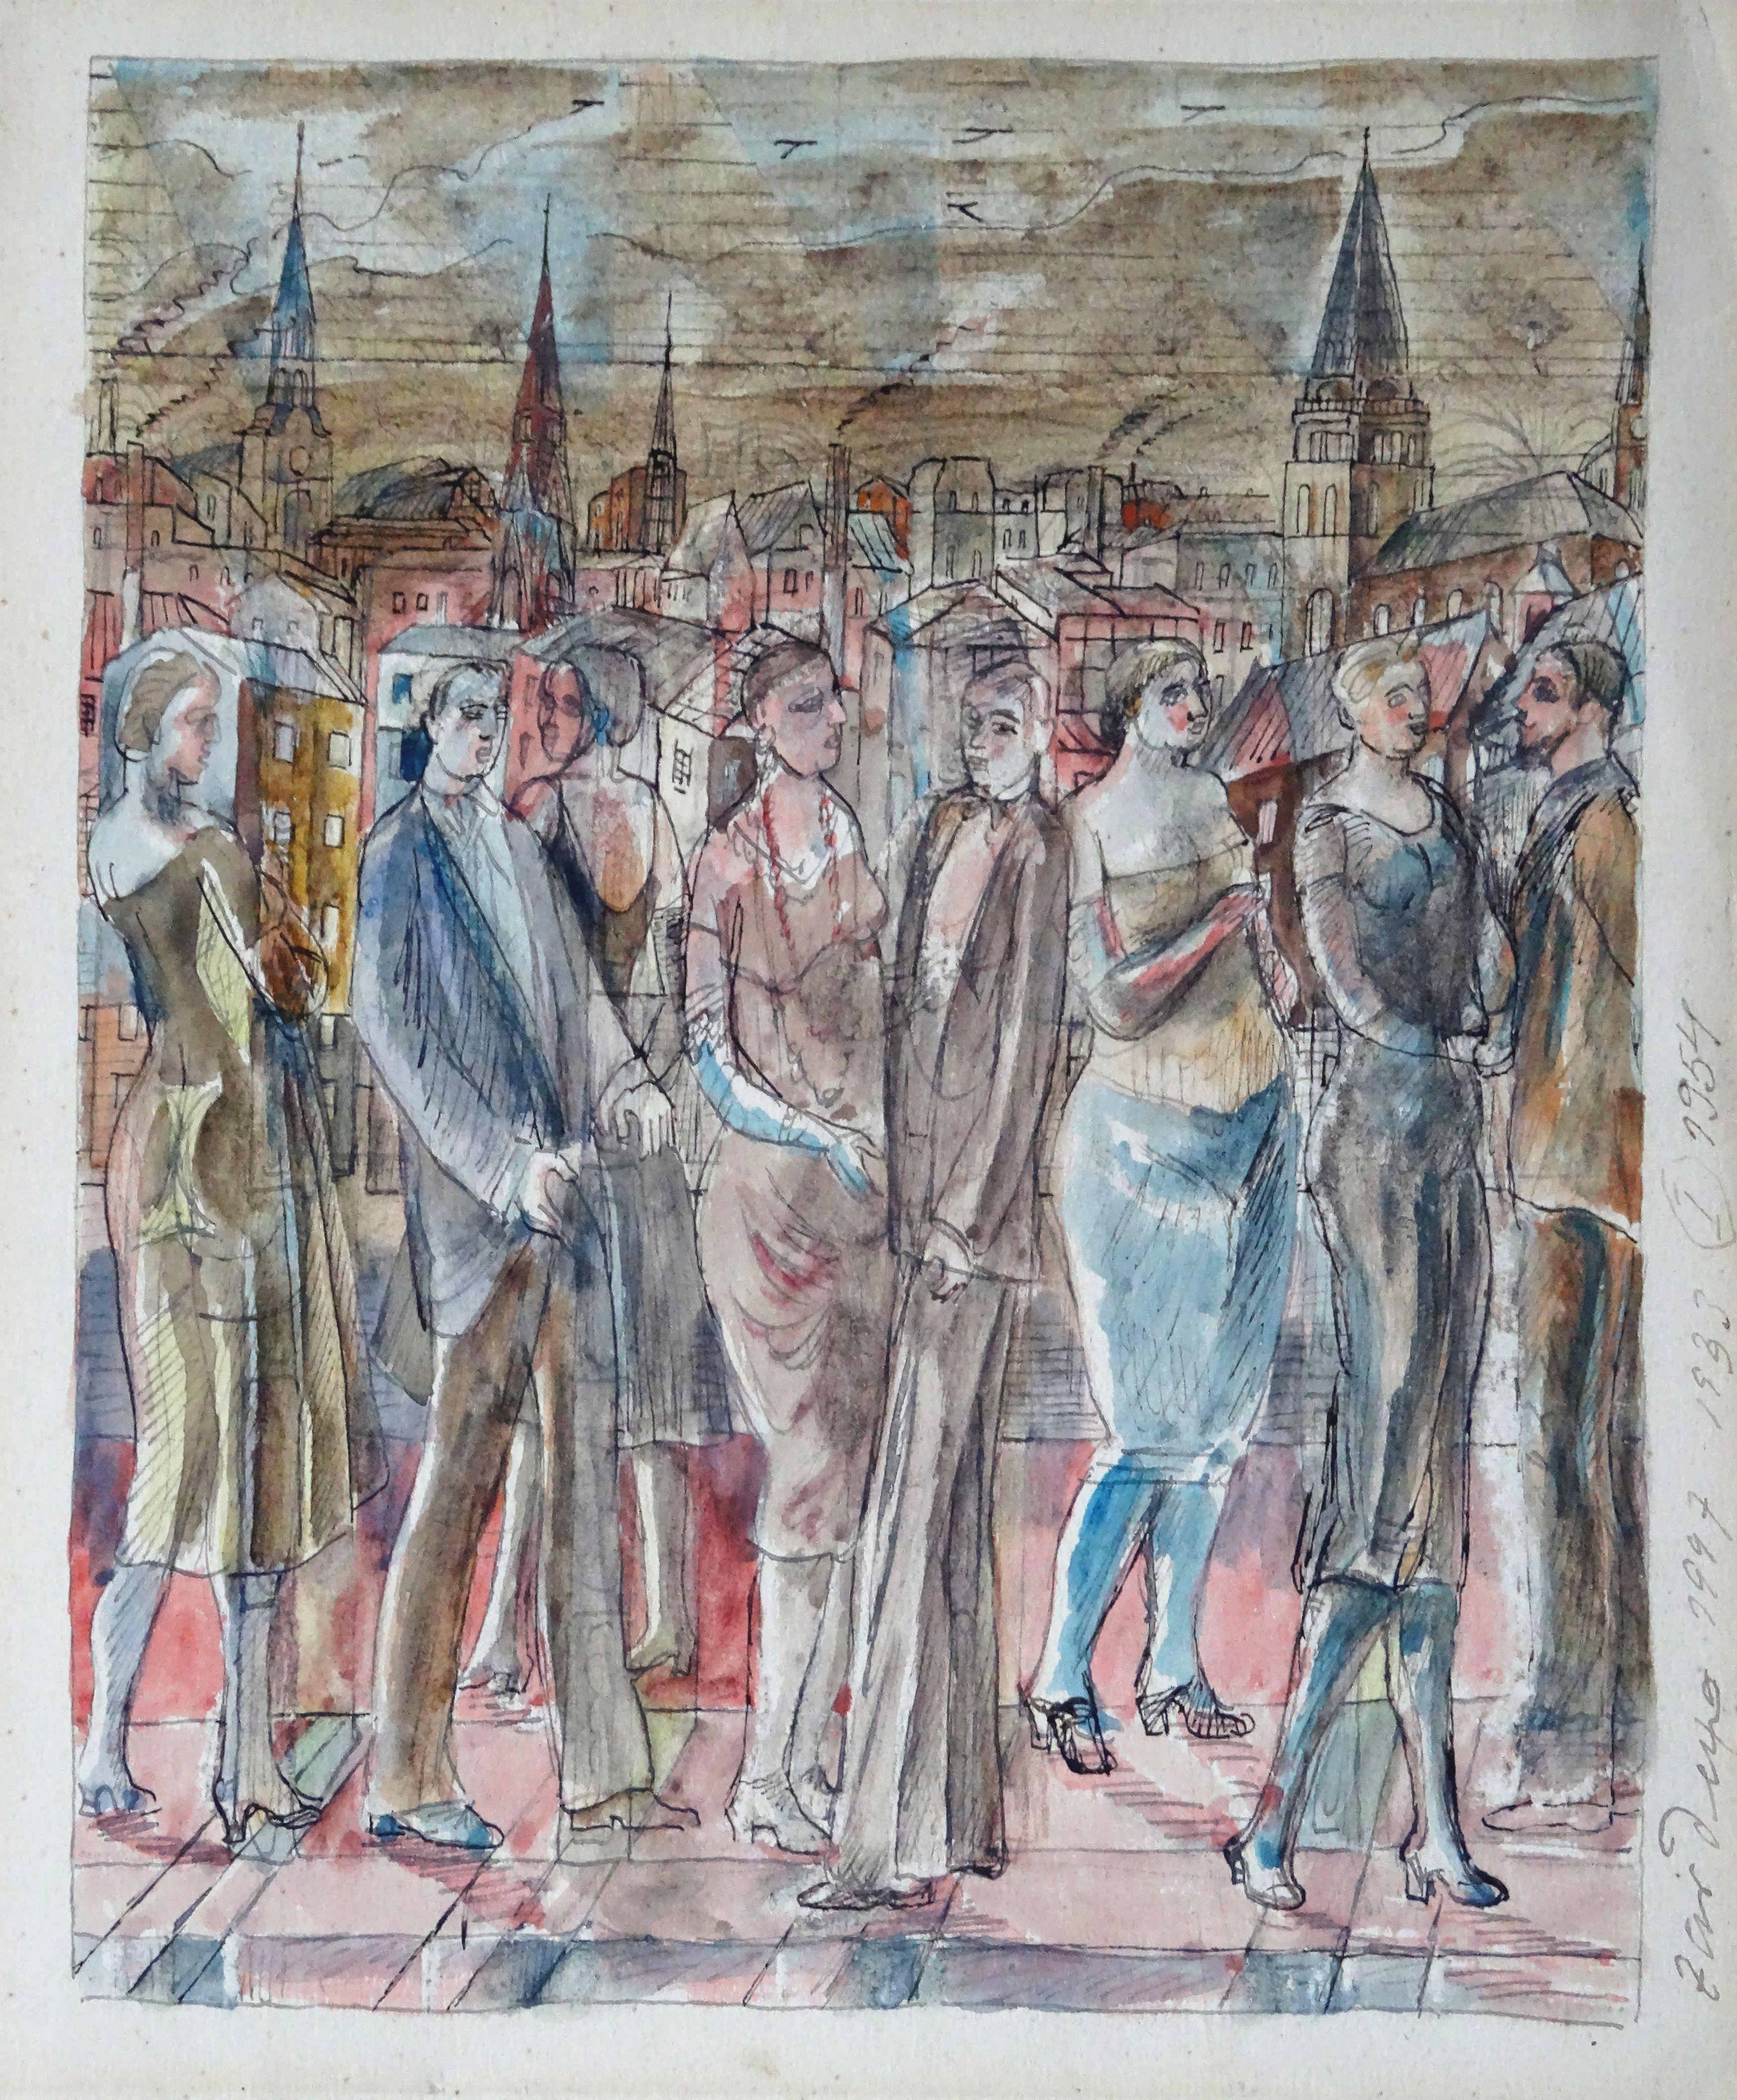 Overflight over the city. 1947, paper, mixed media, 23x20 cm - Painting by Adolfs Zardins